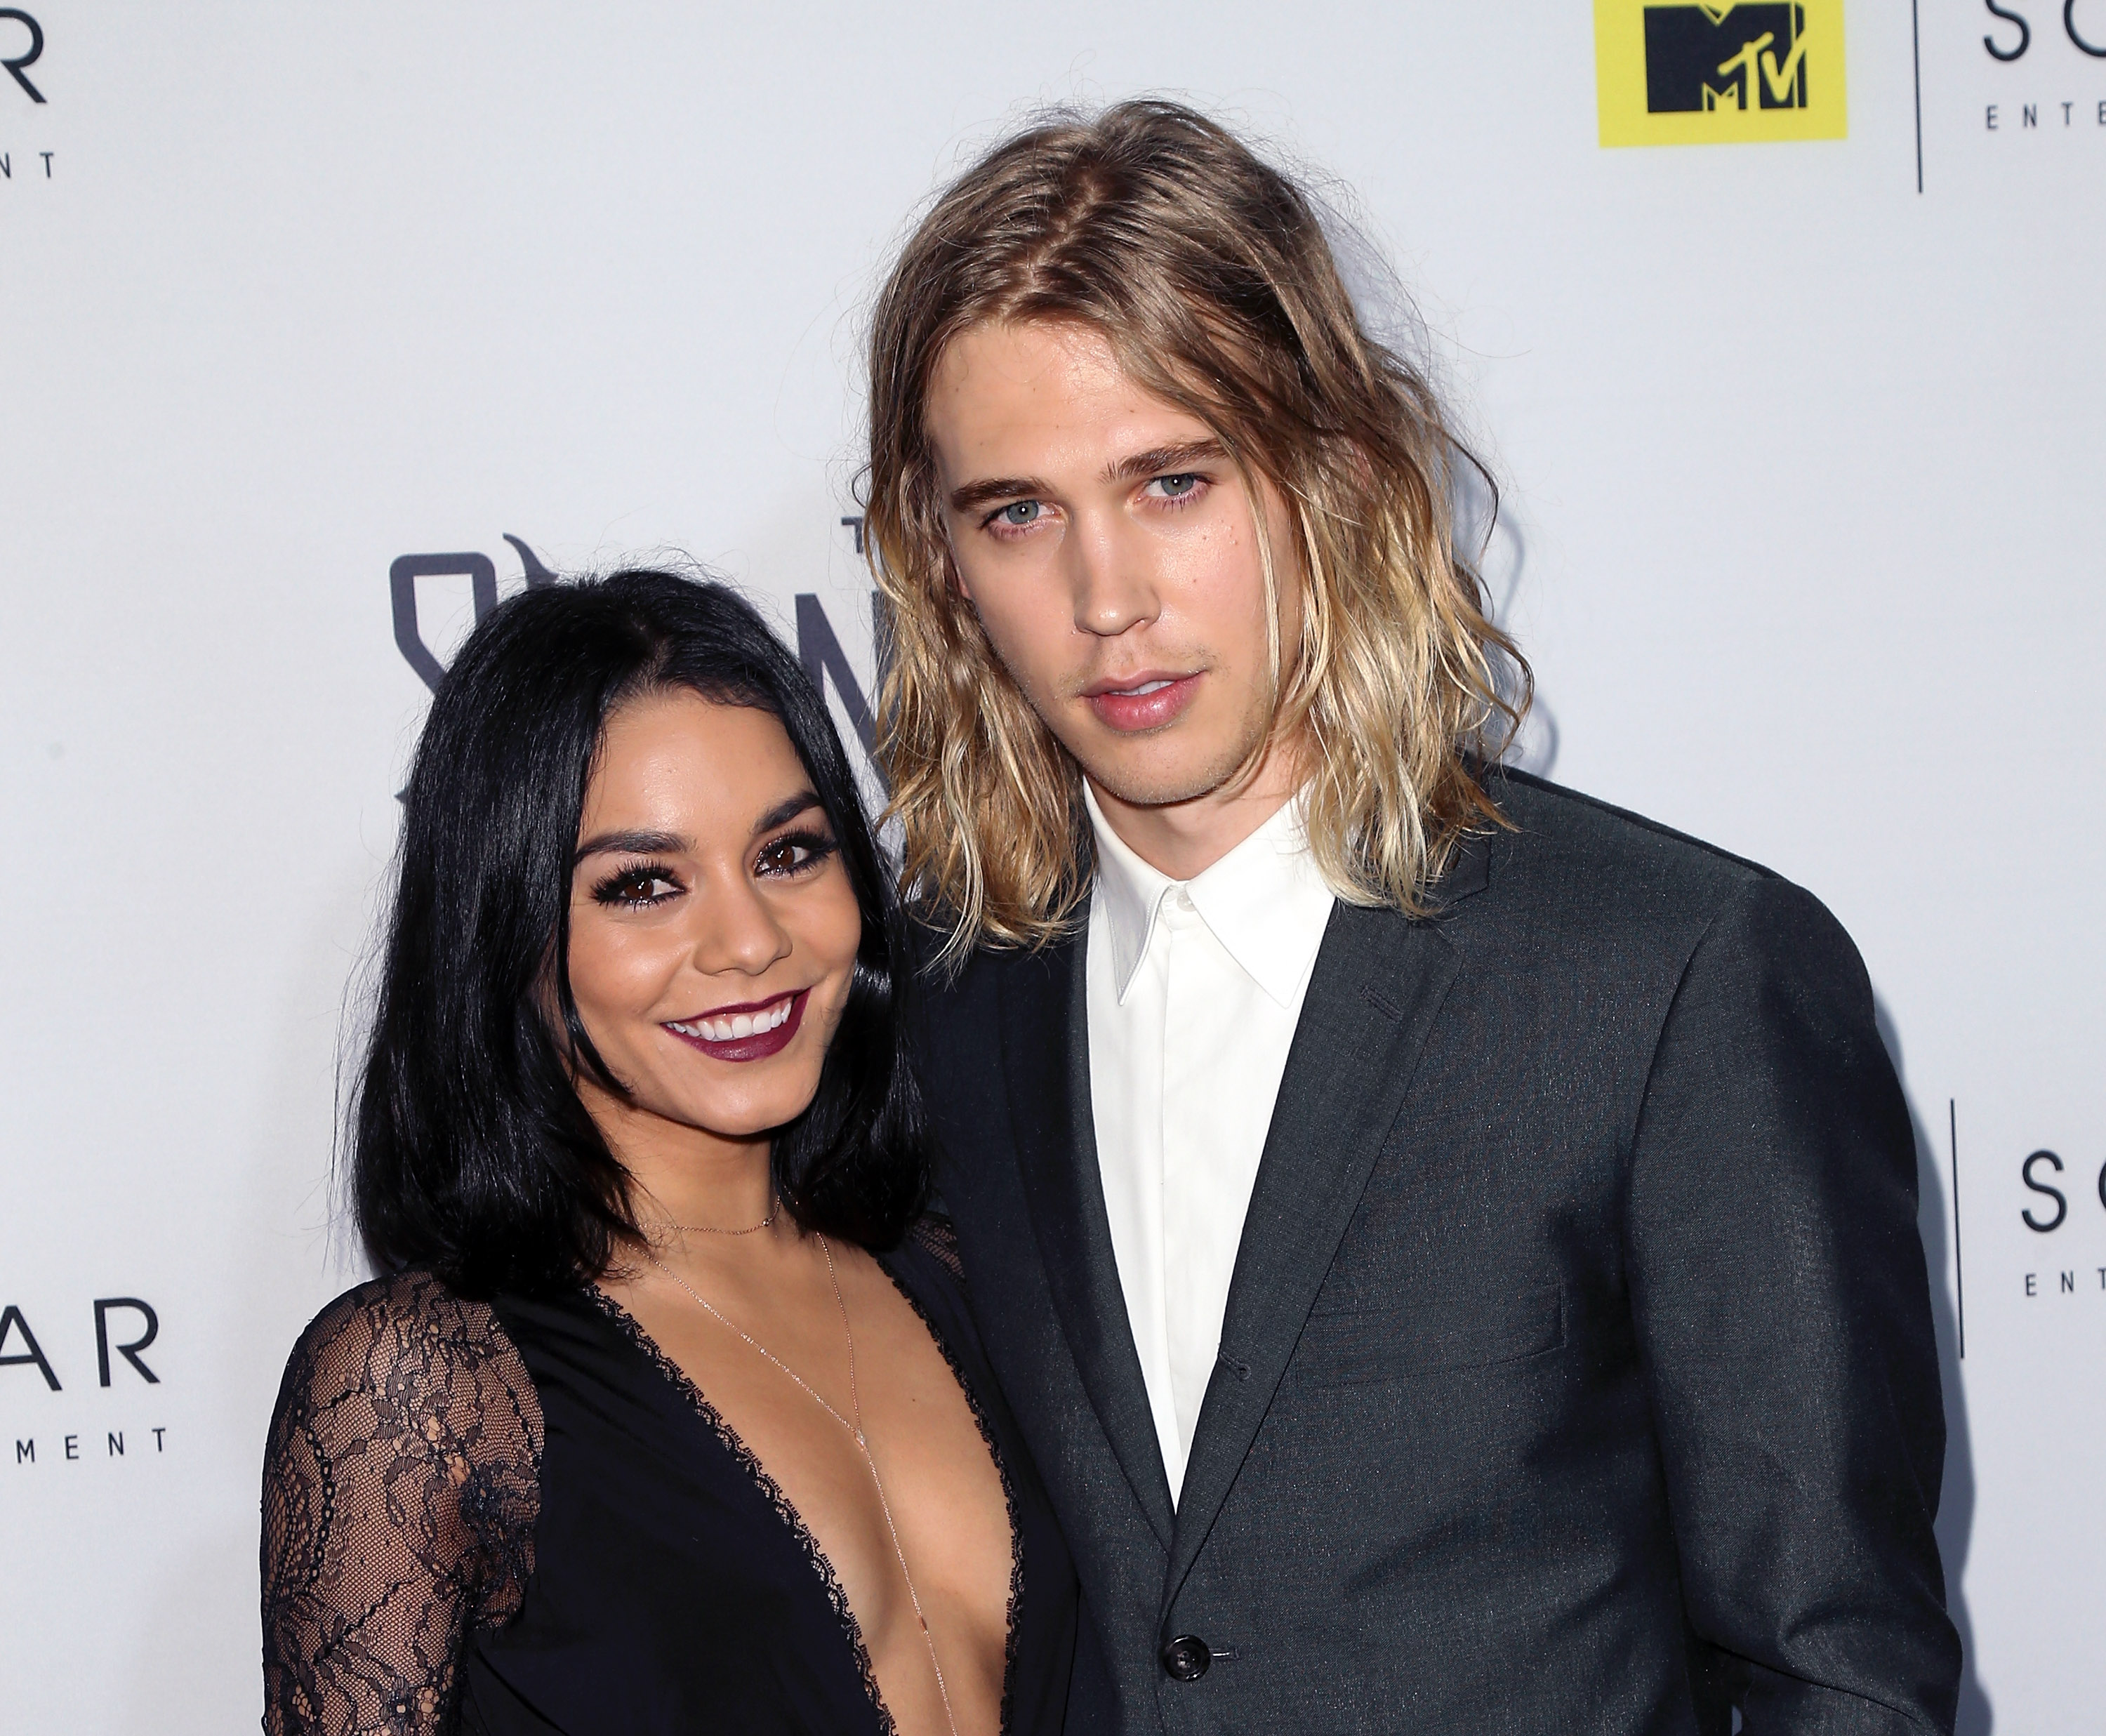 Premiere Of MTV's "The Shannara Chronicles" - Arrivals